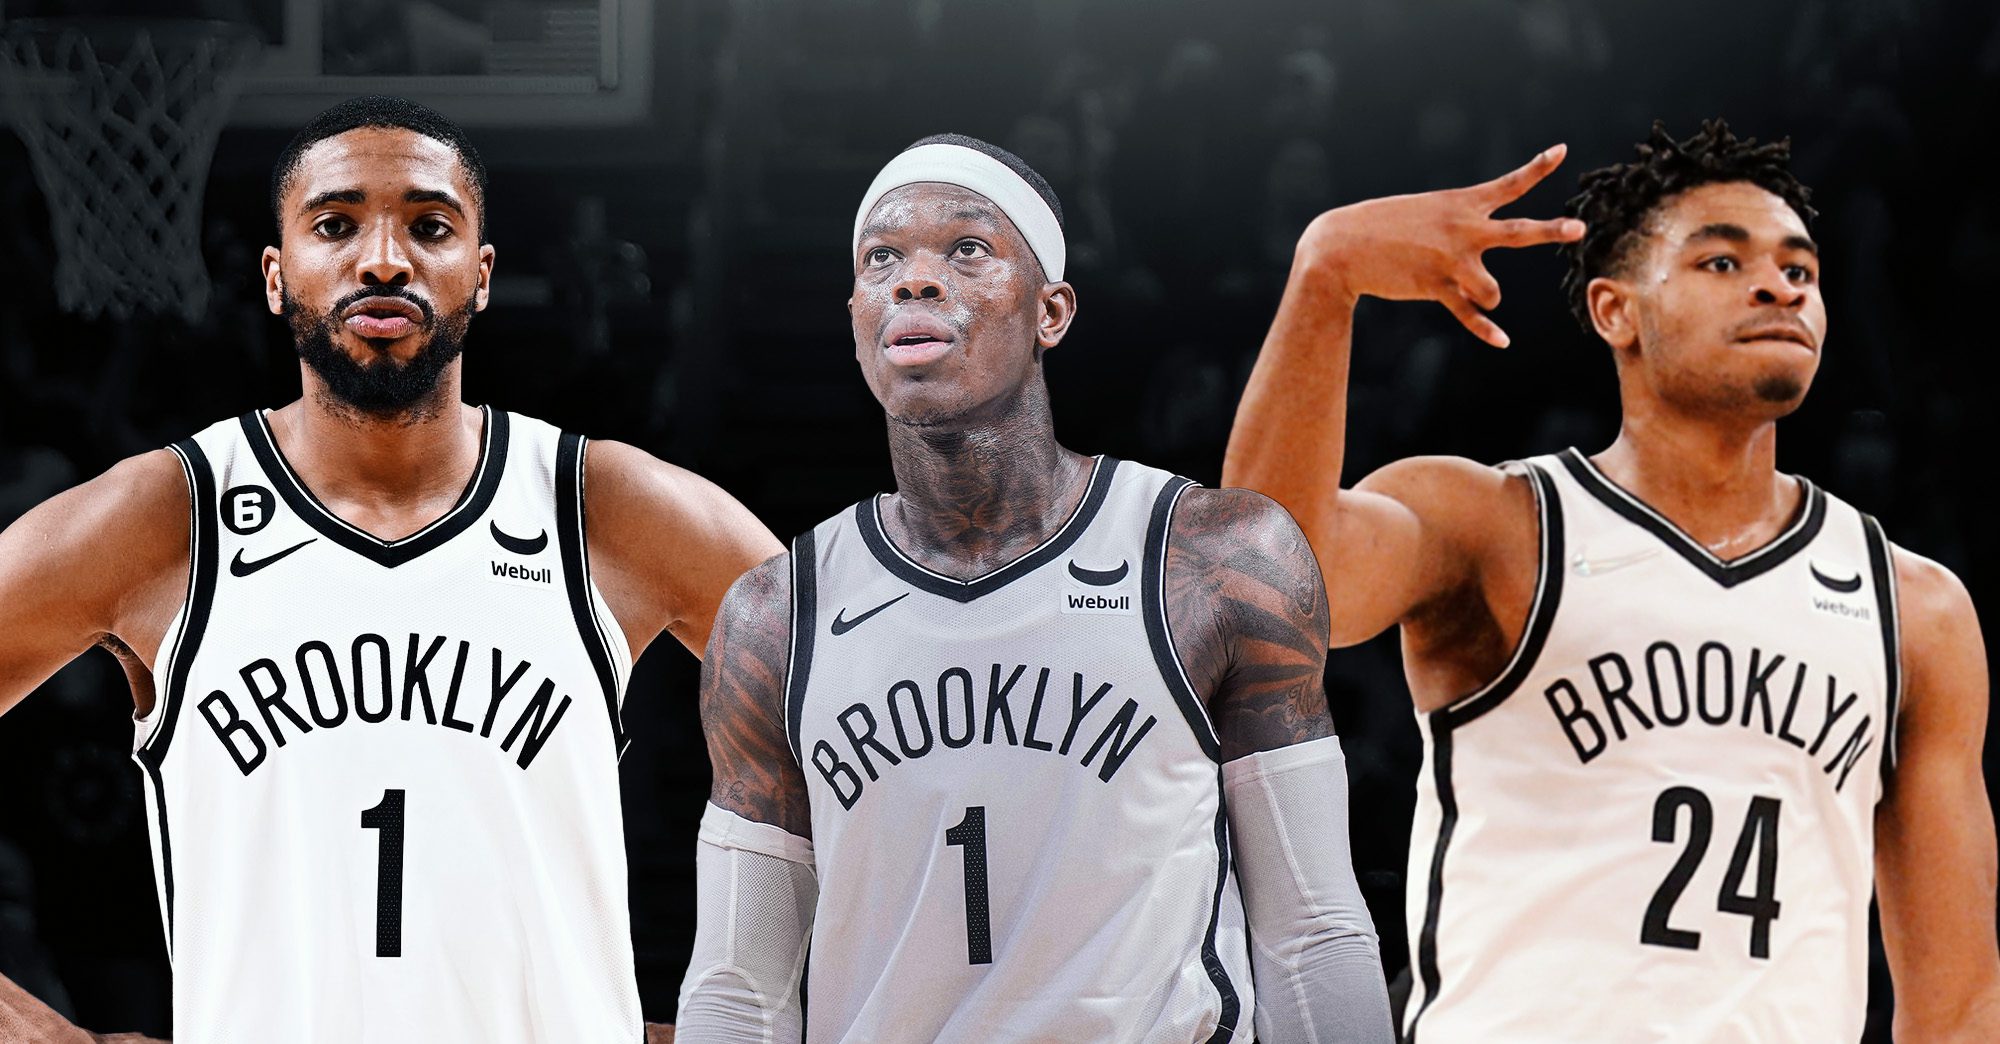 Dennis Schroder Reacts to Being Traded to the Nets